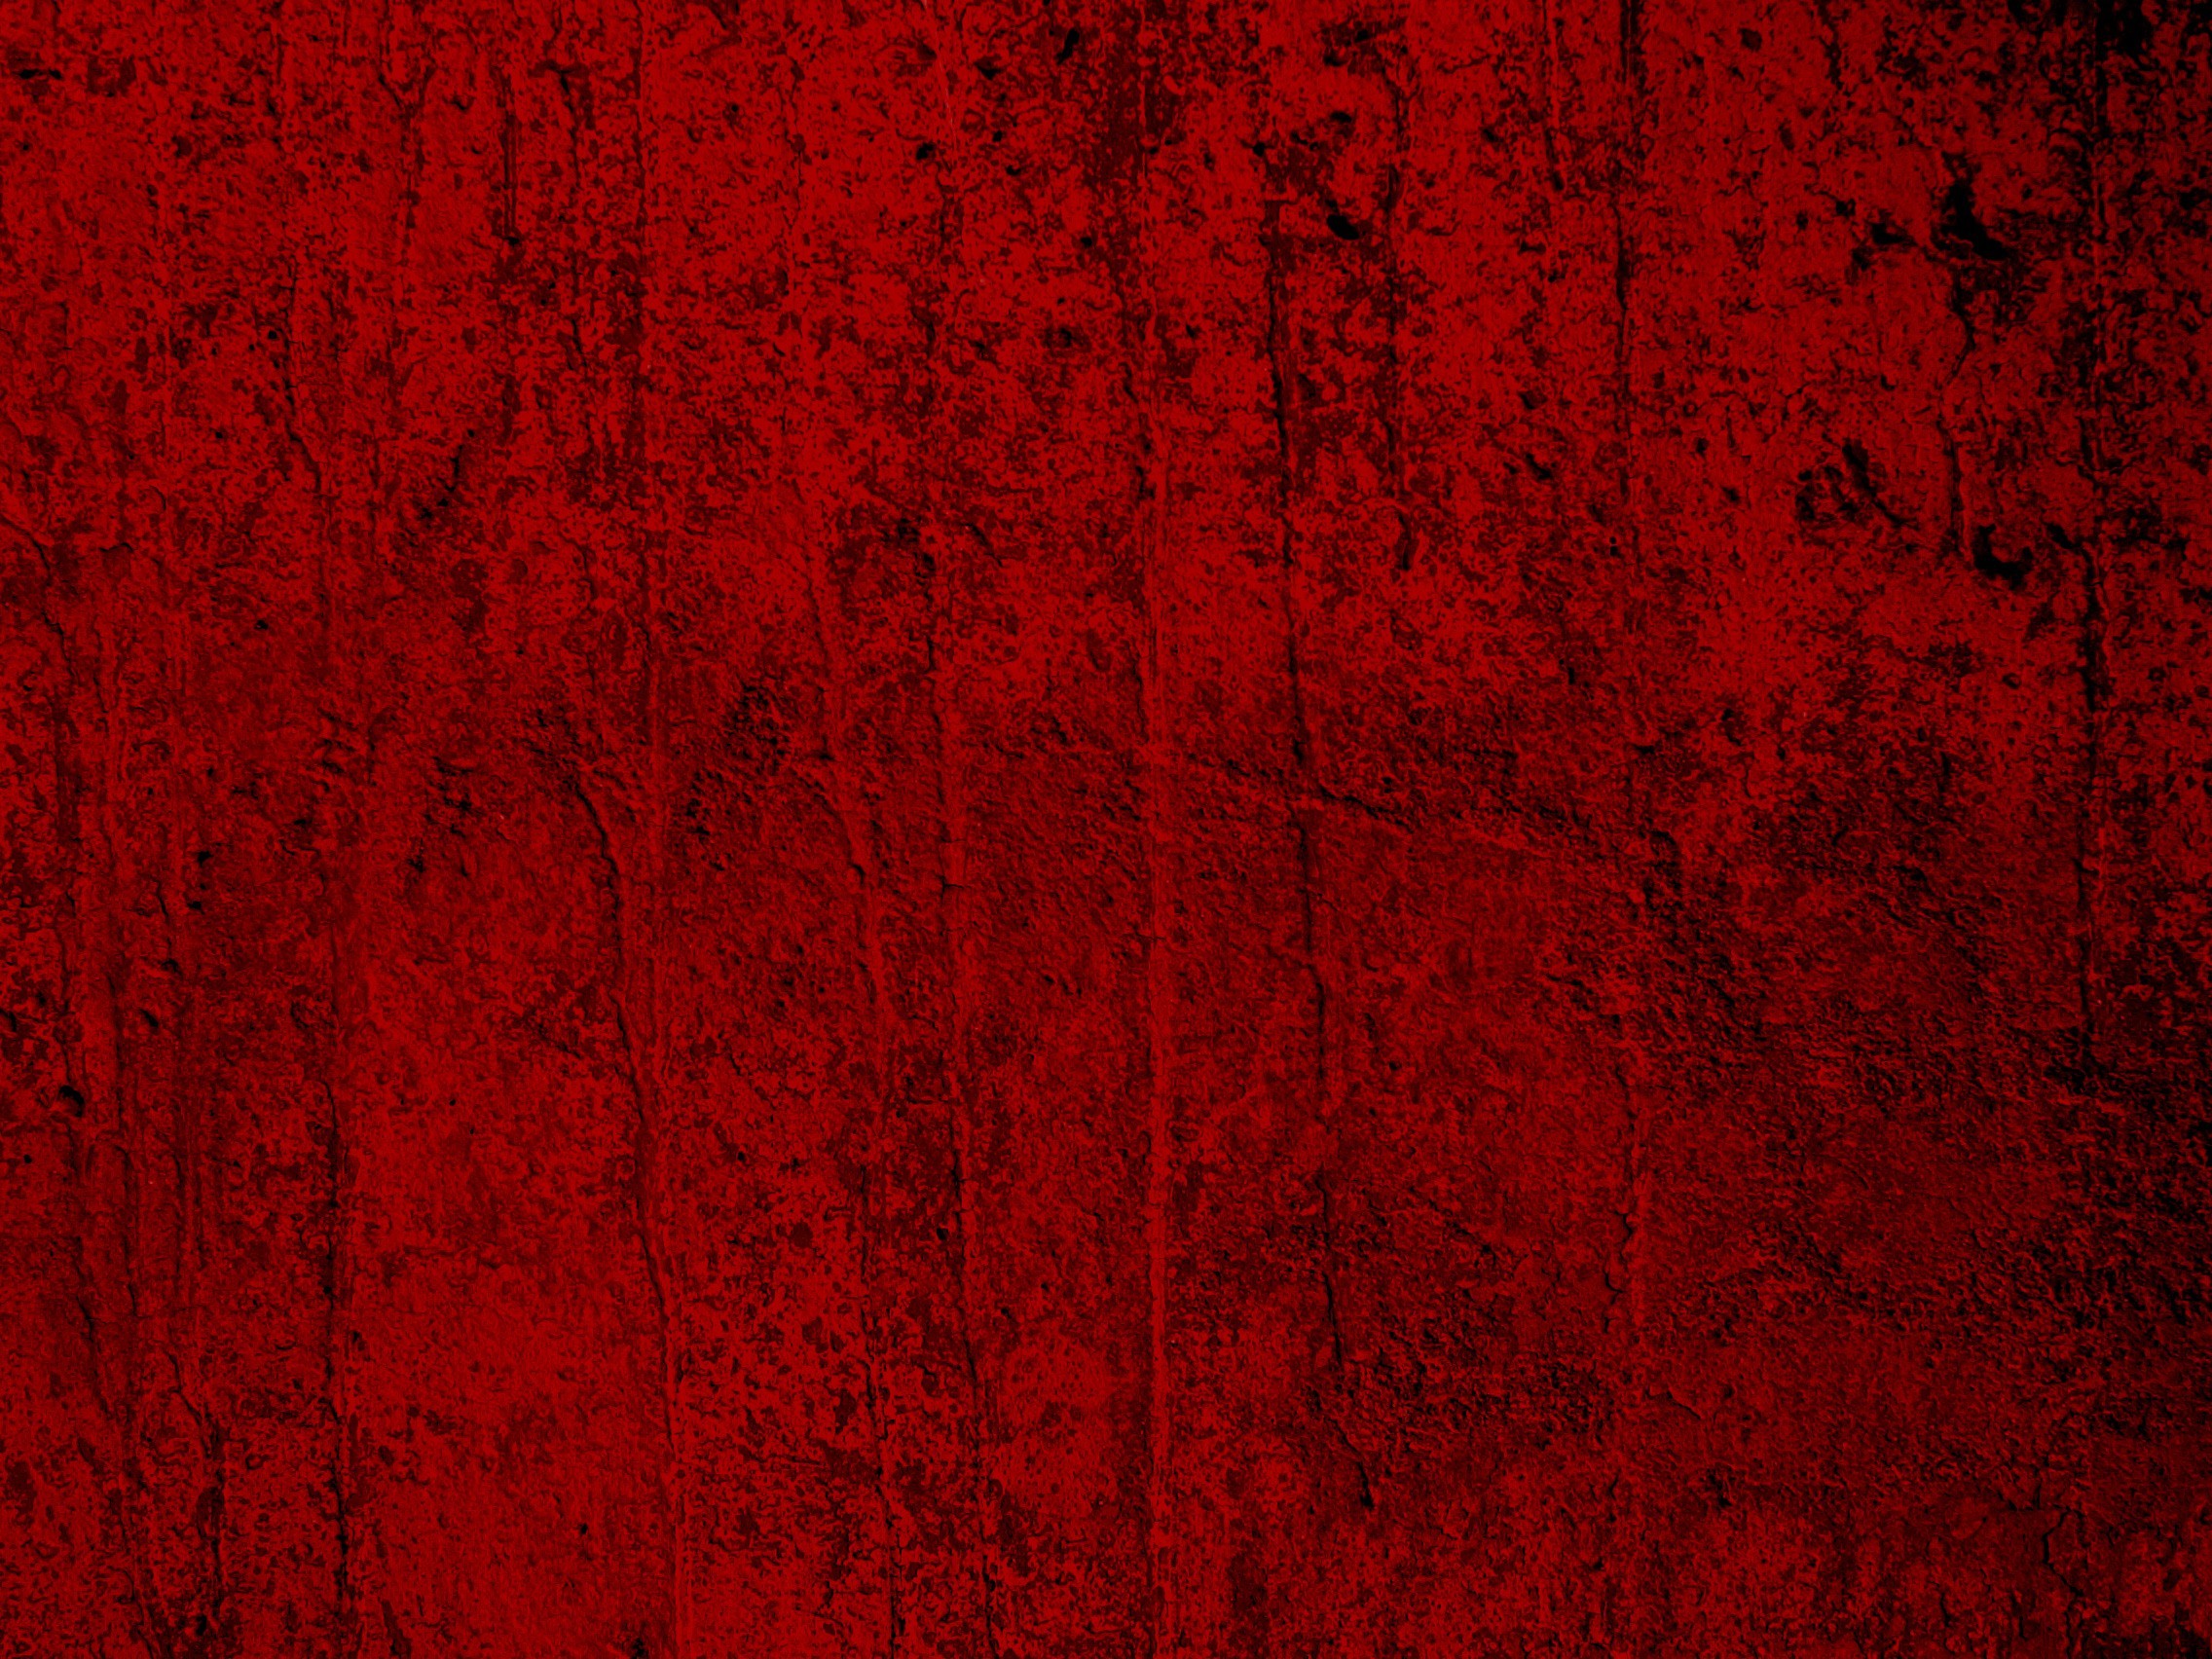 2272x1704  Grunge Red Background Backgrounds Red Grunge Background Background  #4249